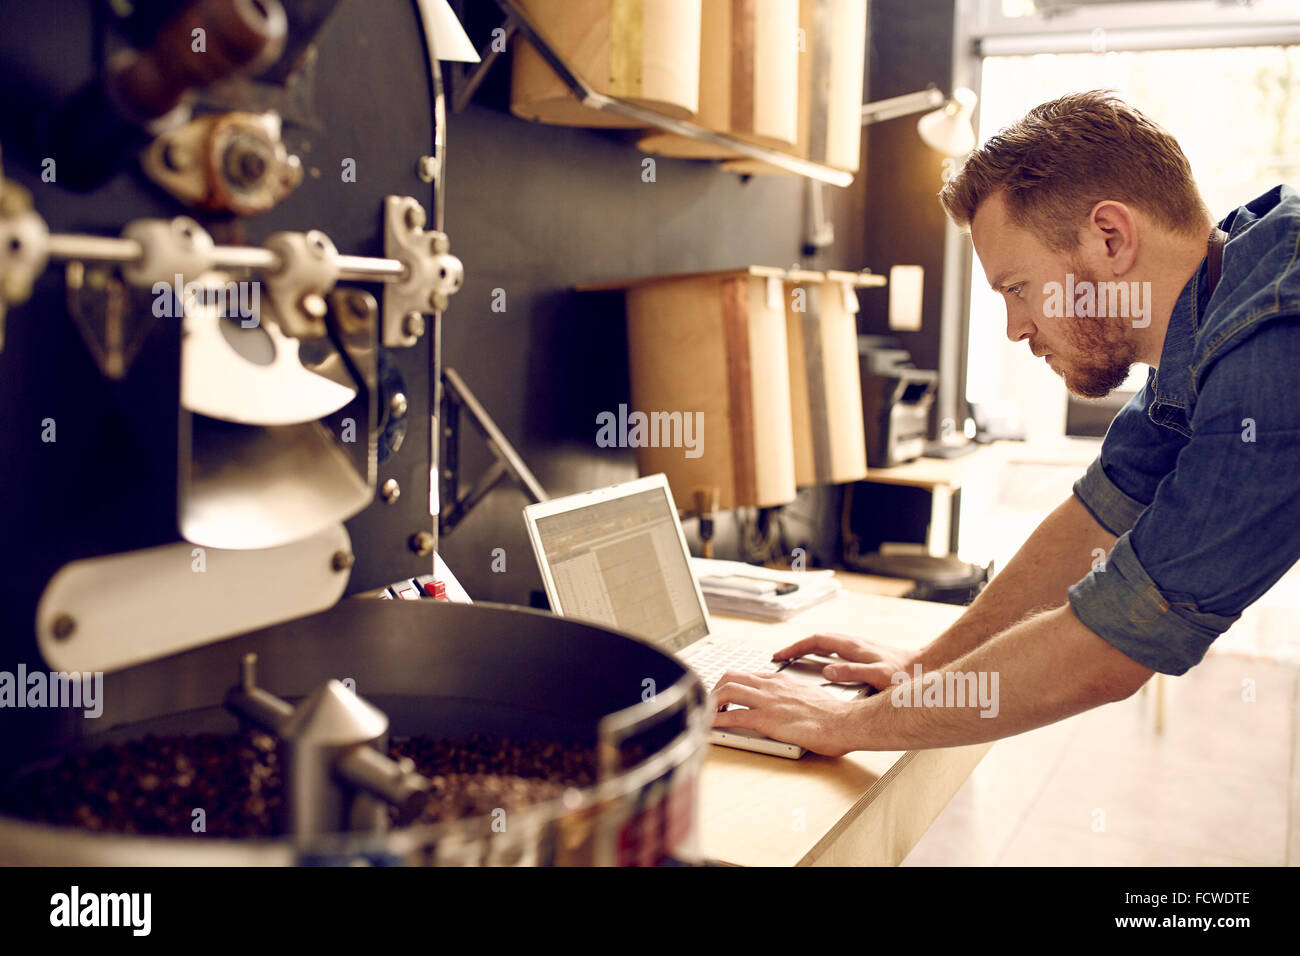 Business owner of a coffee roastery checking his laptop Stock Photo